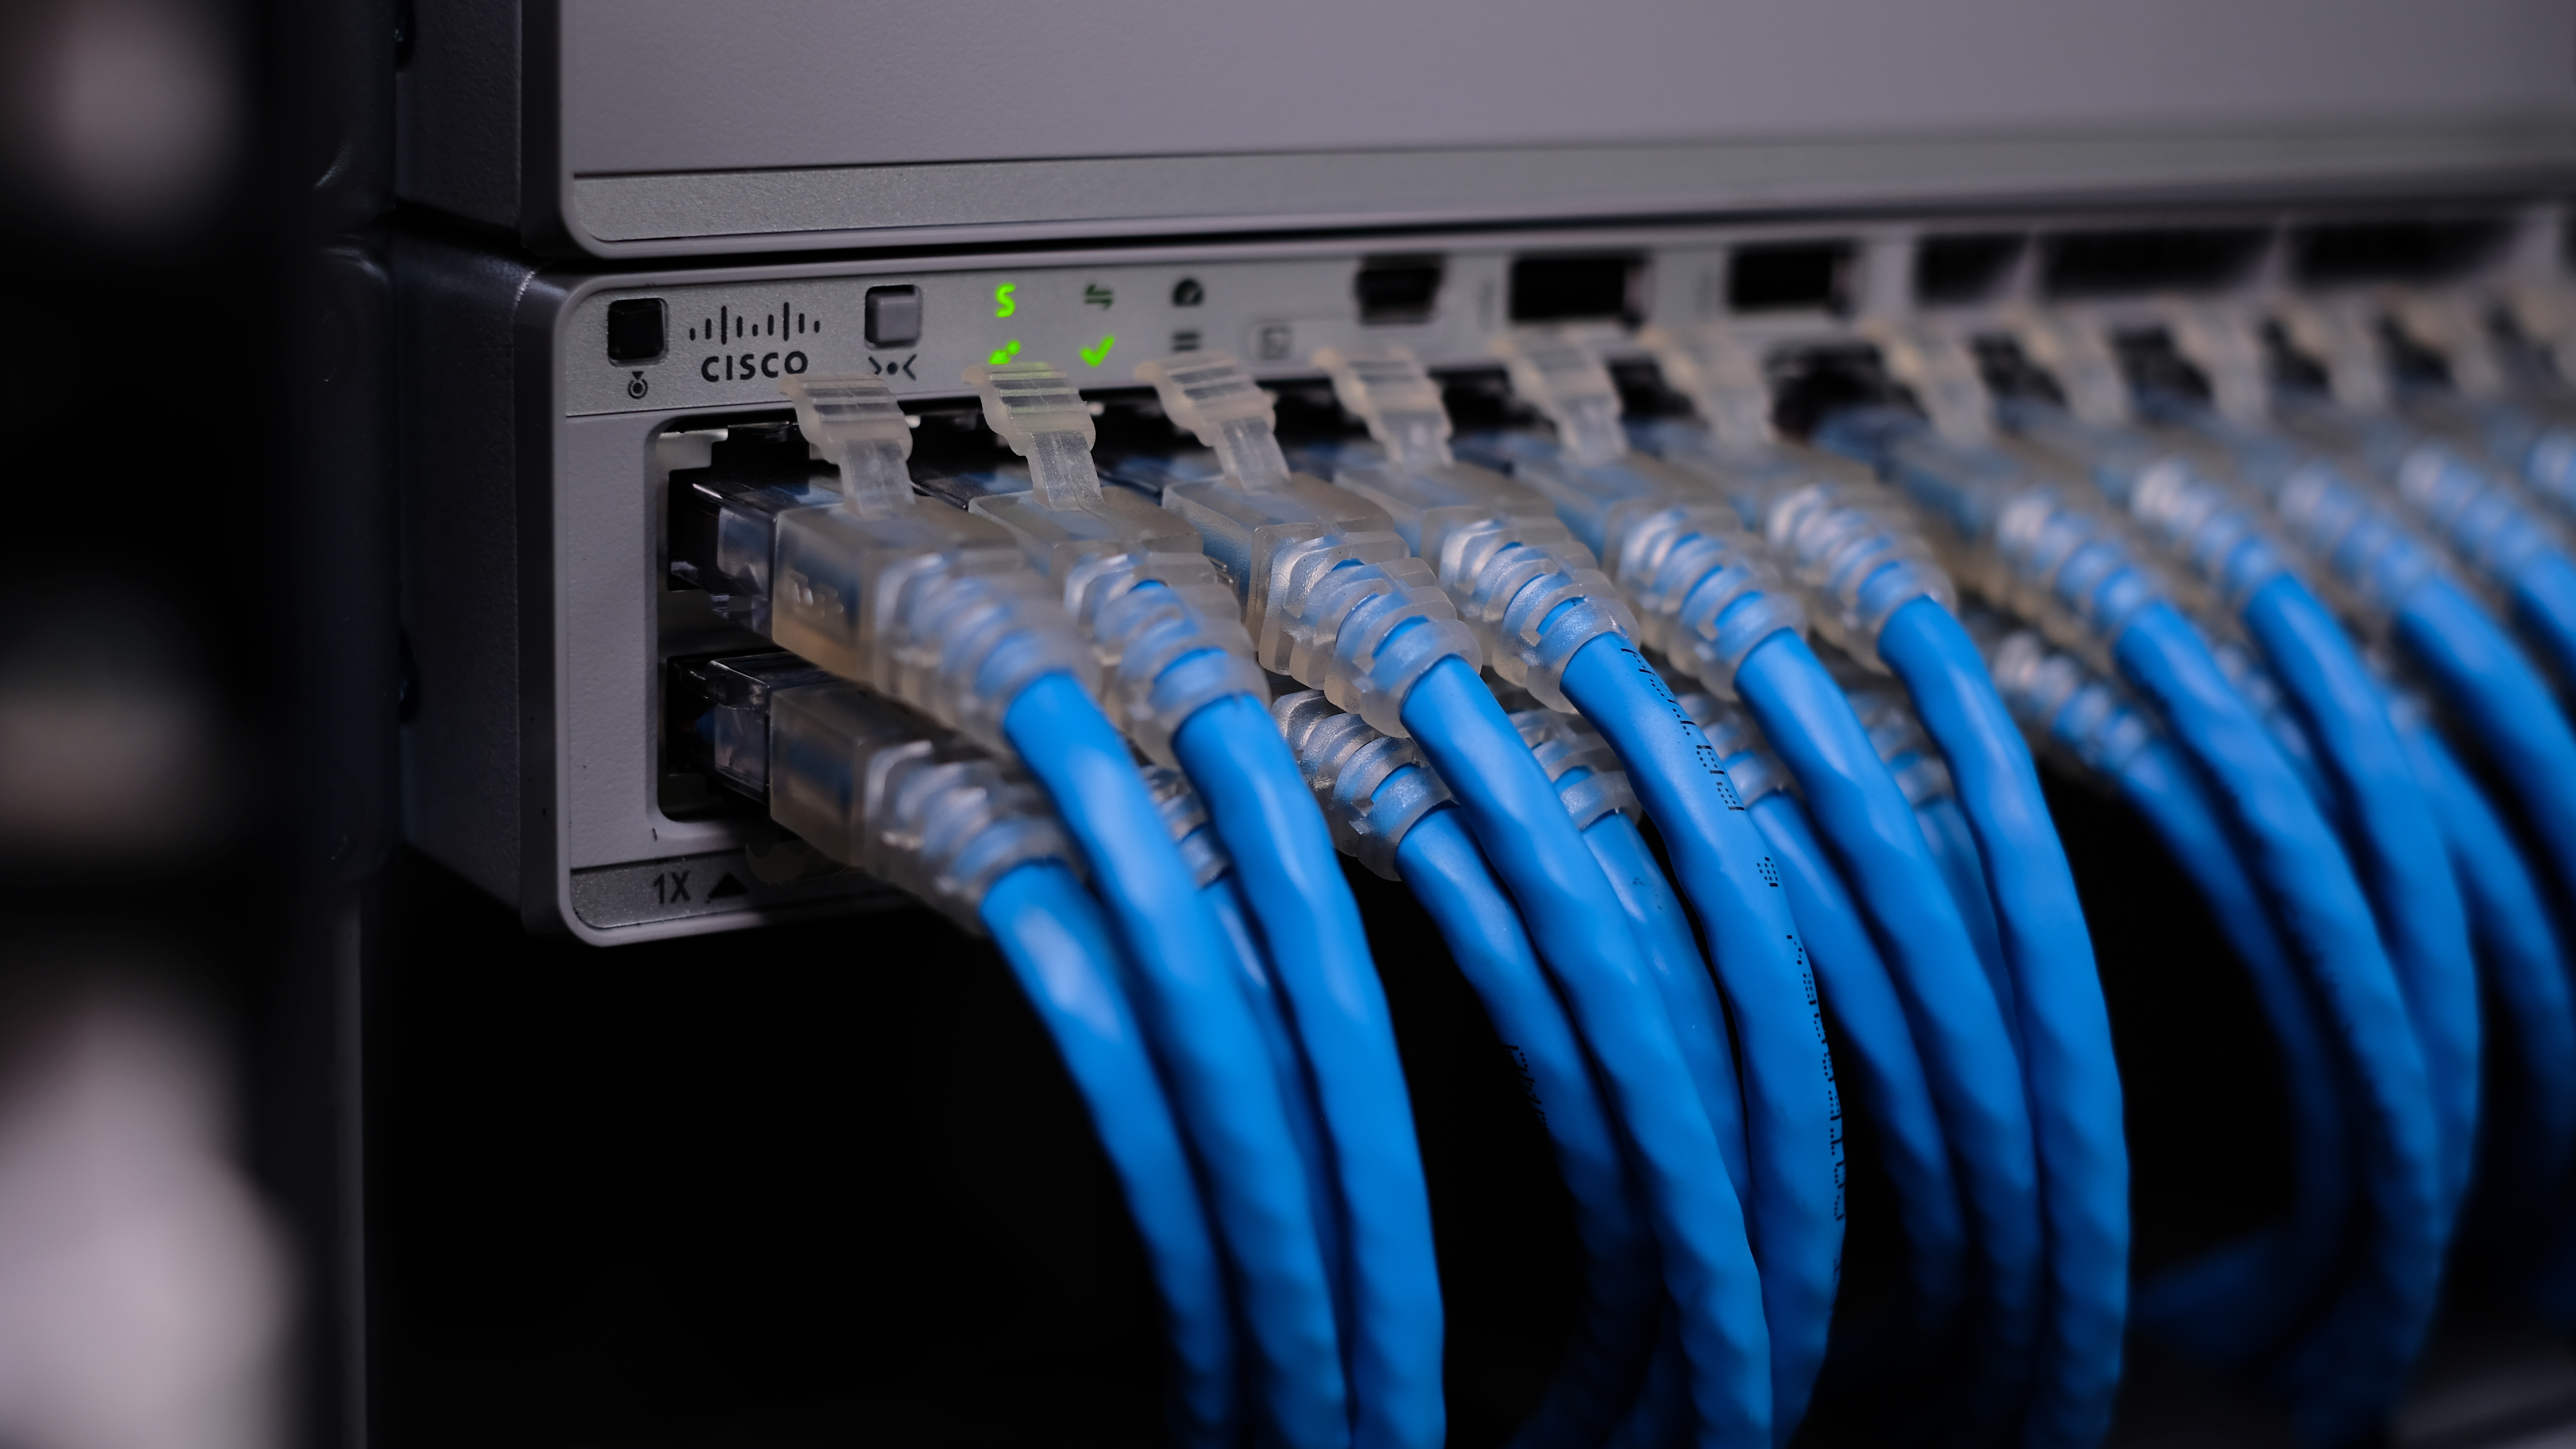 Cisco networking technology